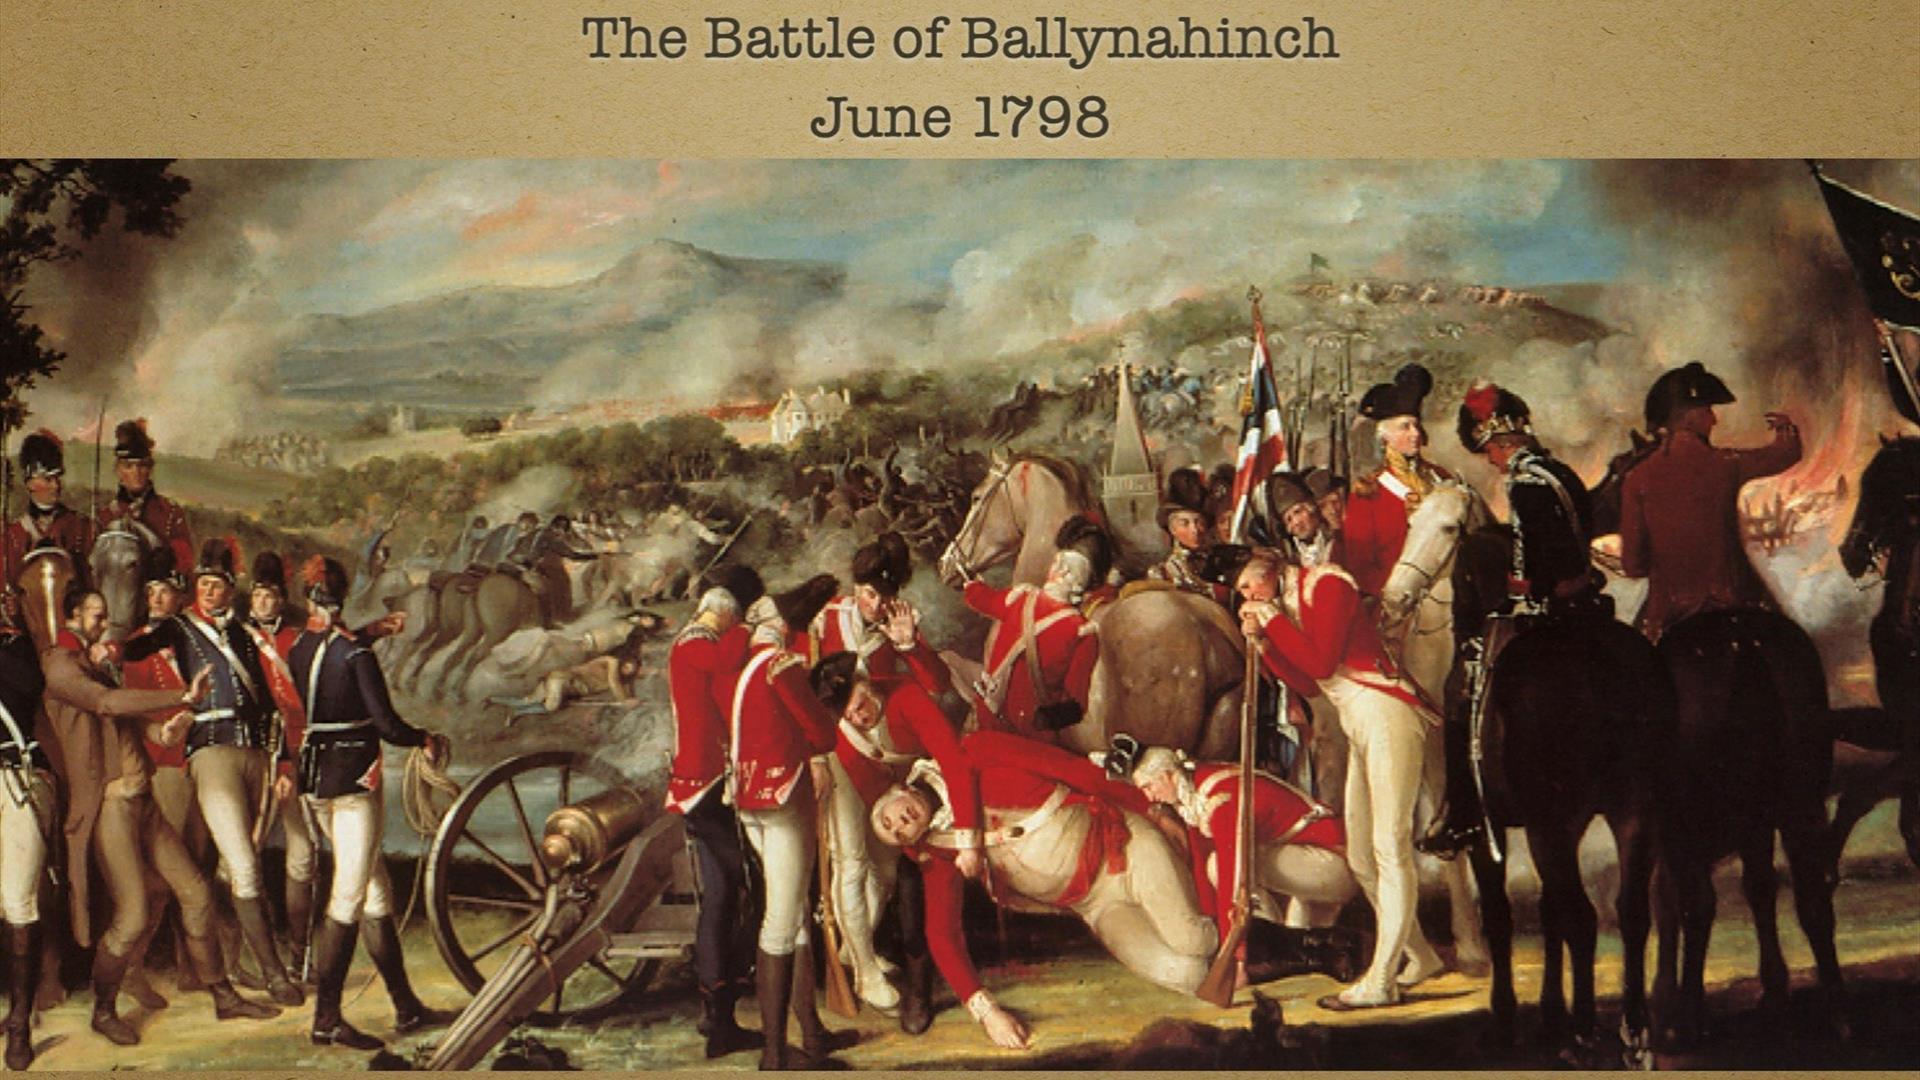 Title screen, showing a reproduction of the Battle of Ballynahinch painting, which shows soldiers in redcoats carrying a man who has been shot in the